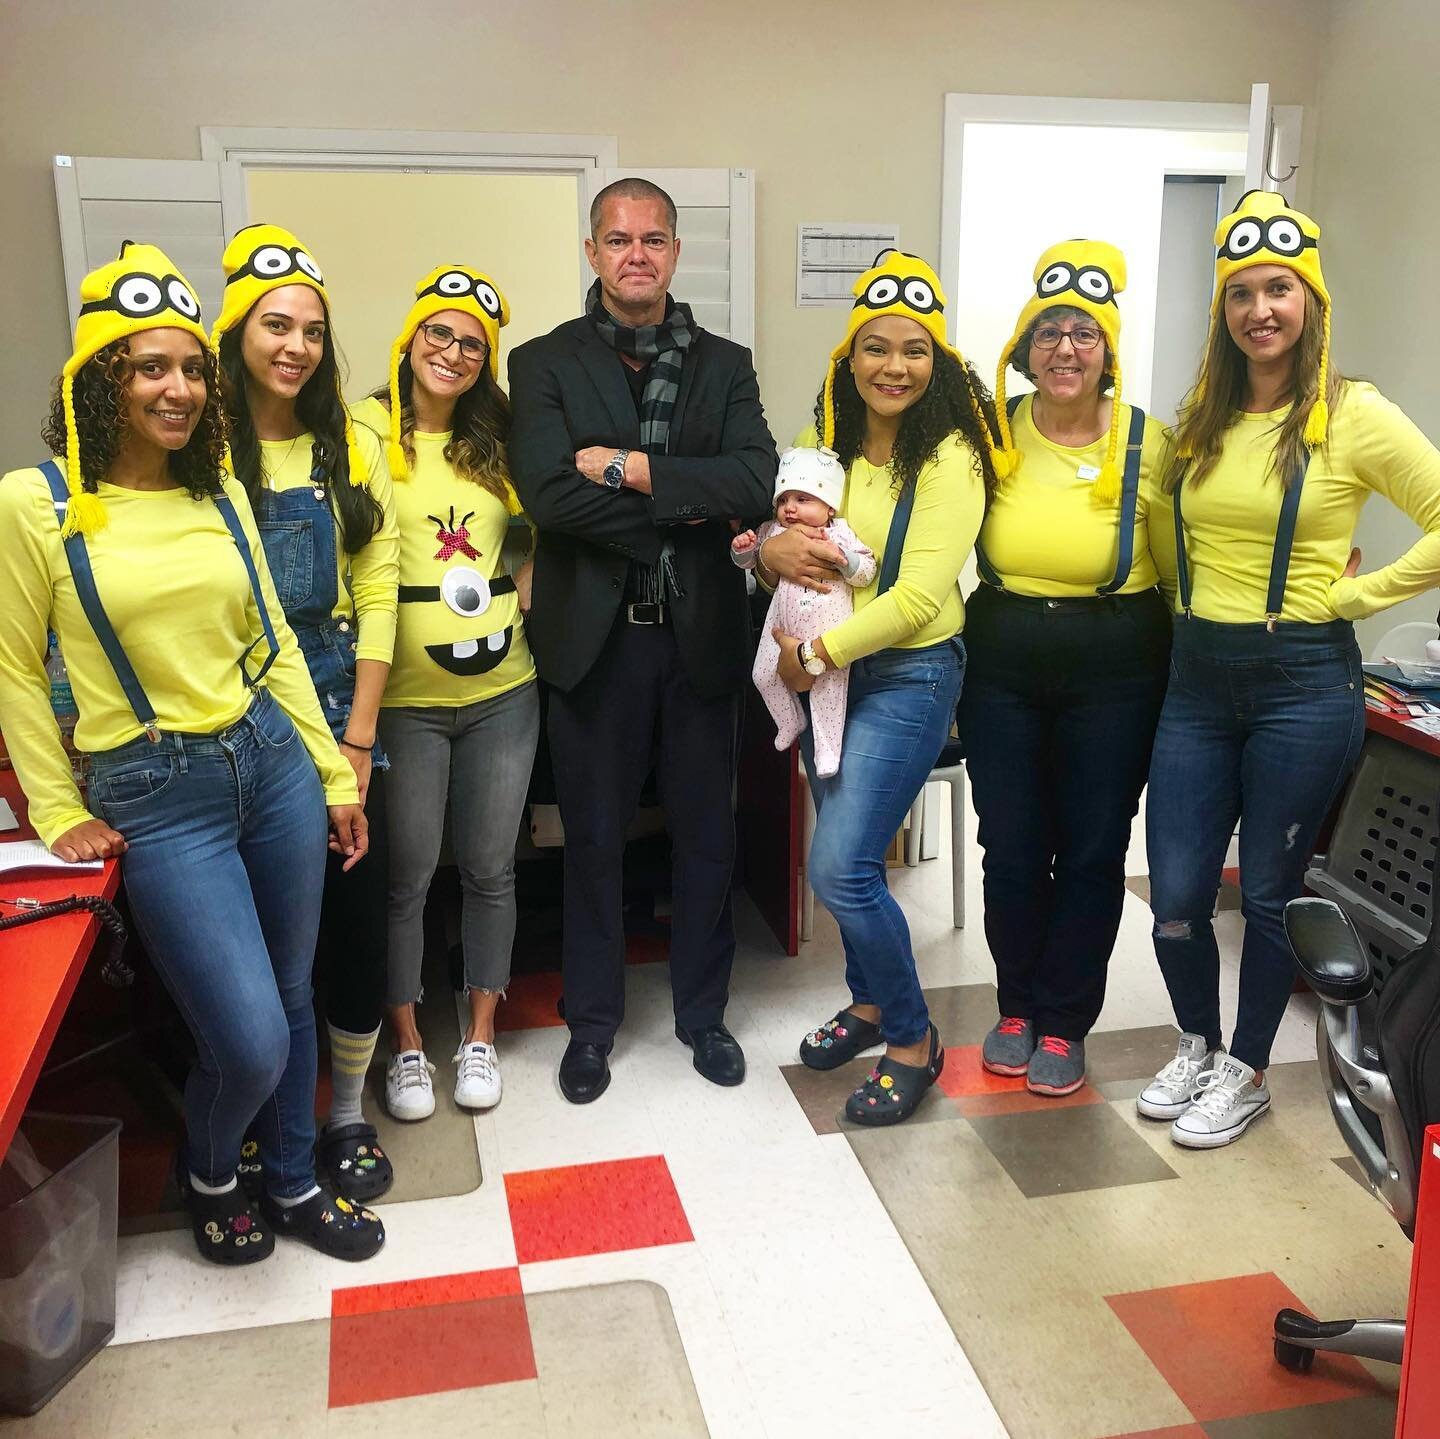 Gru and his minions! We love to dress up here at POBAR! I hope everyone that goes trick-or-treating gets a lot of candy, has fun, and most importantly STAY SAFE! Bundles of love from POBAR and Happy Halloween!!!!! 🎃👻💀🦄 #happyhalloween #drbrocks #